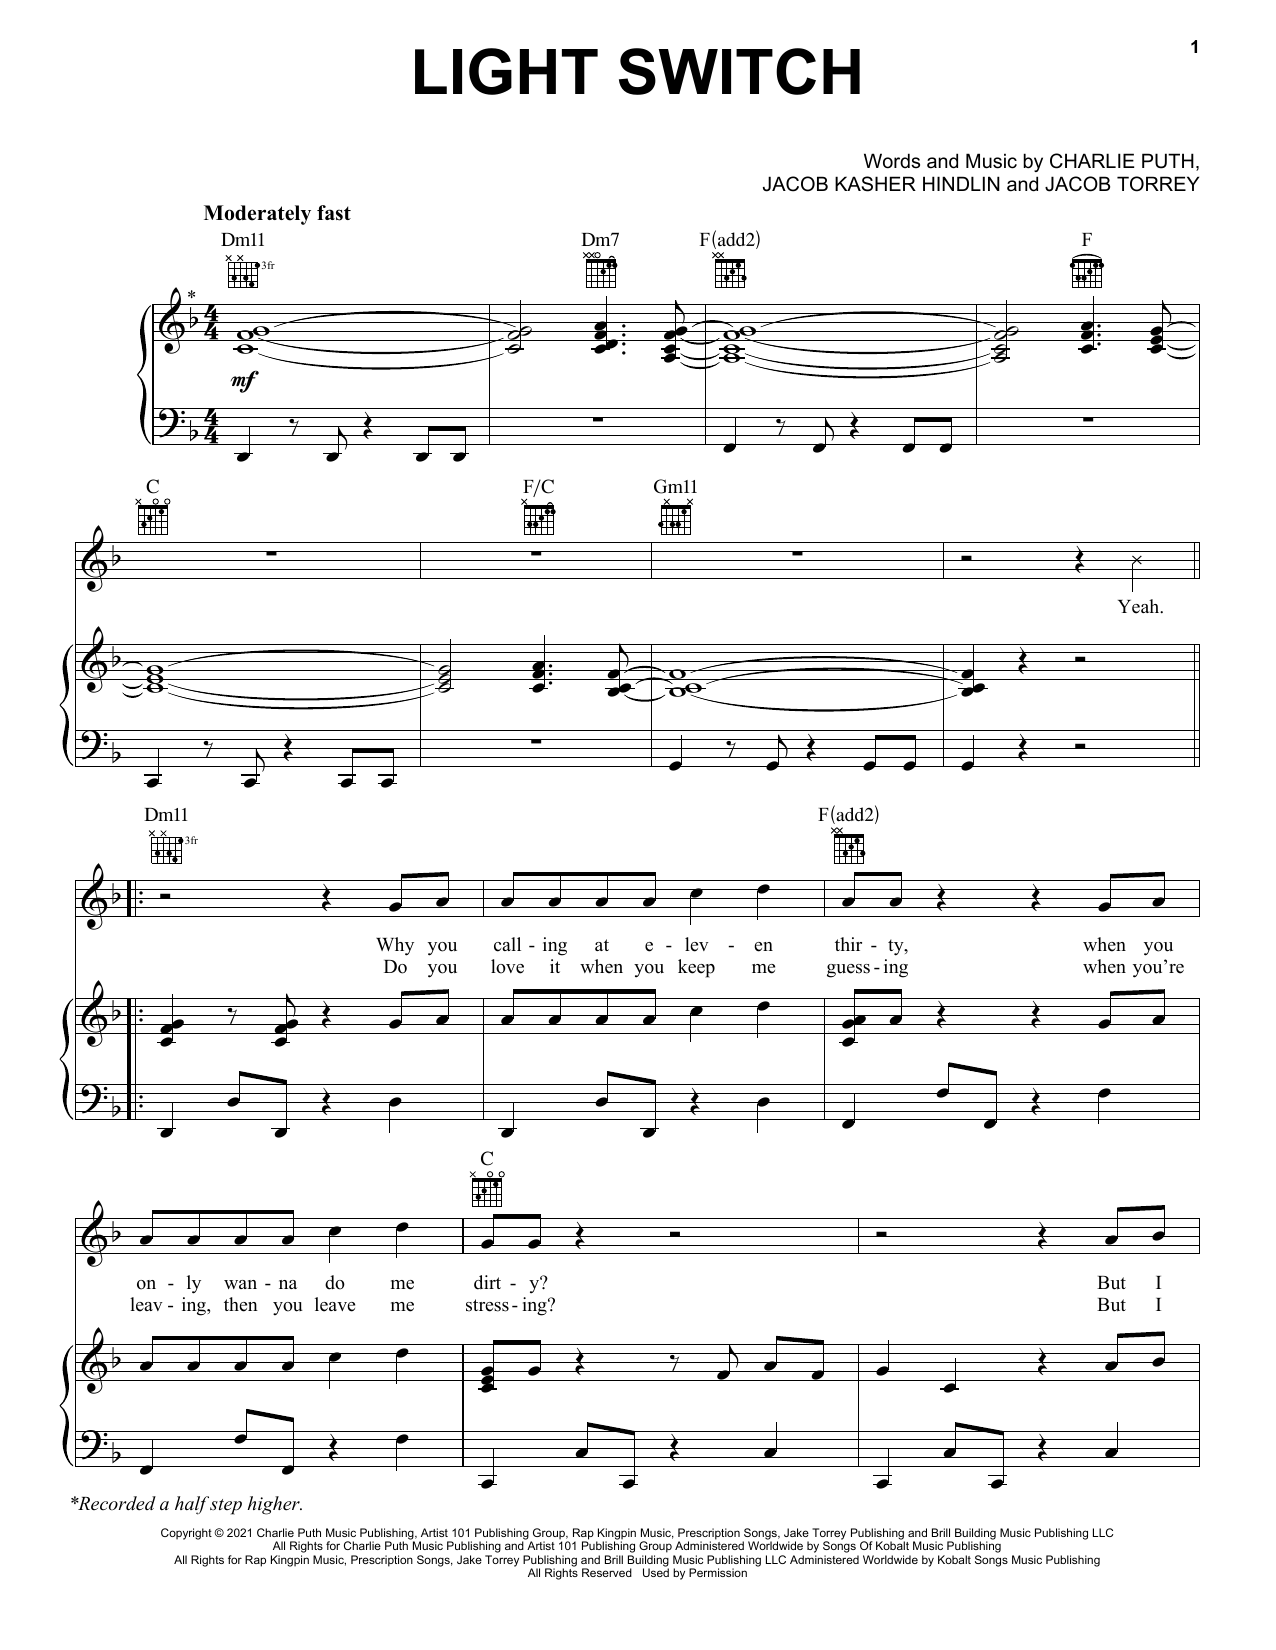 Charlie Puth Light Switch sheet music notes and chords. Download Printable PDF.